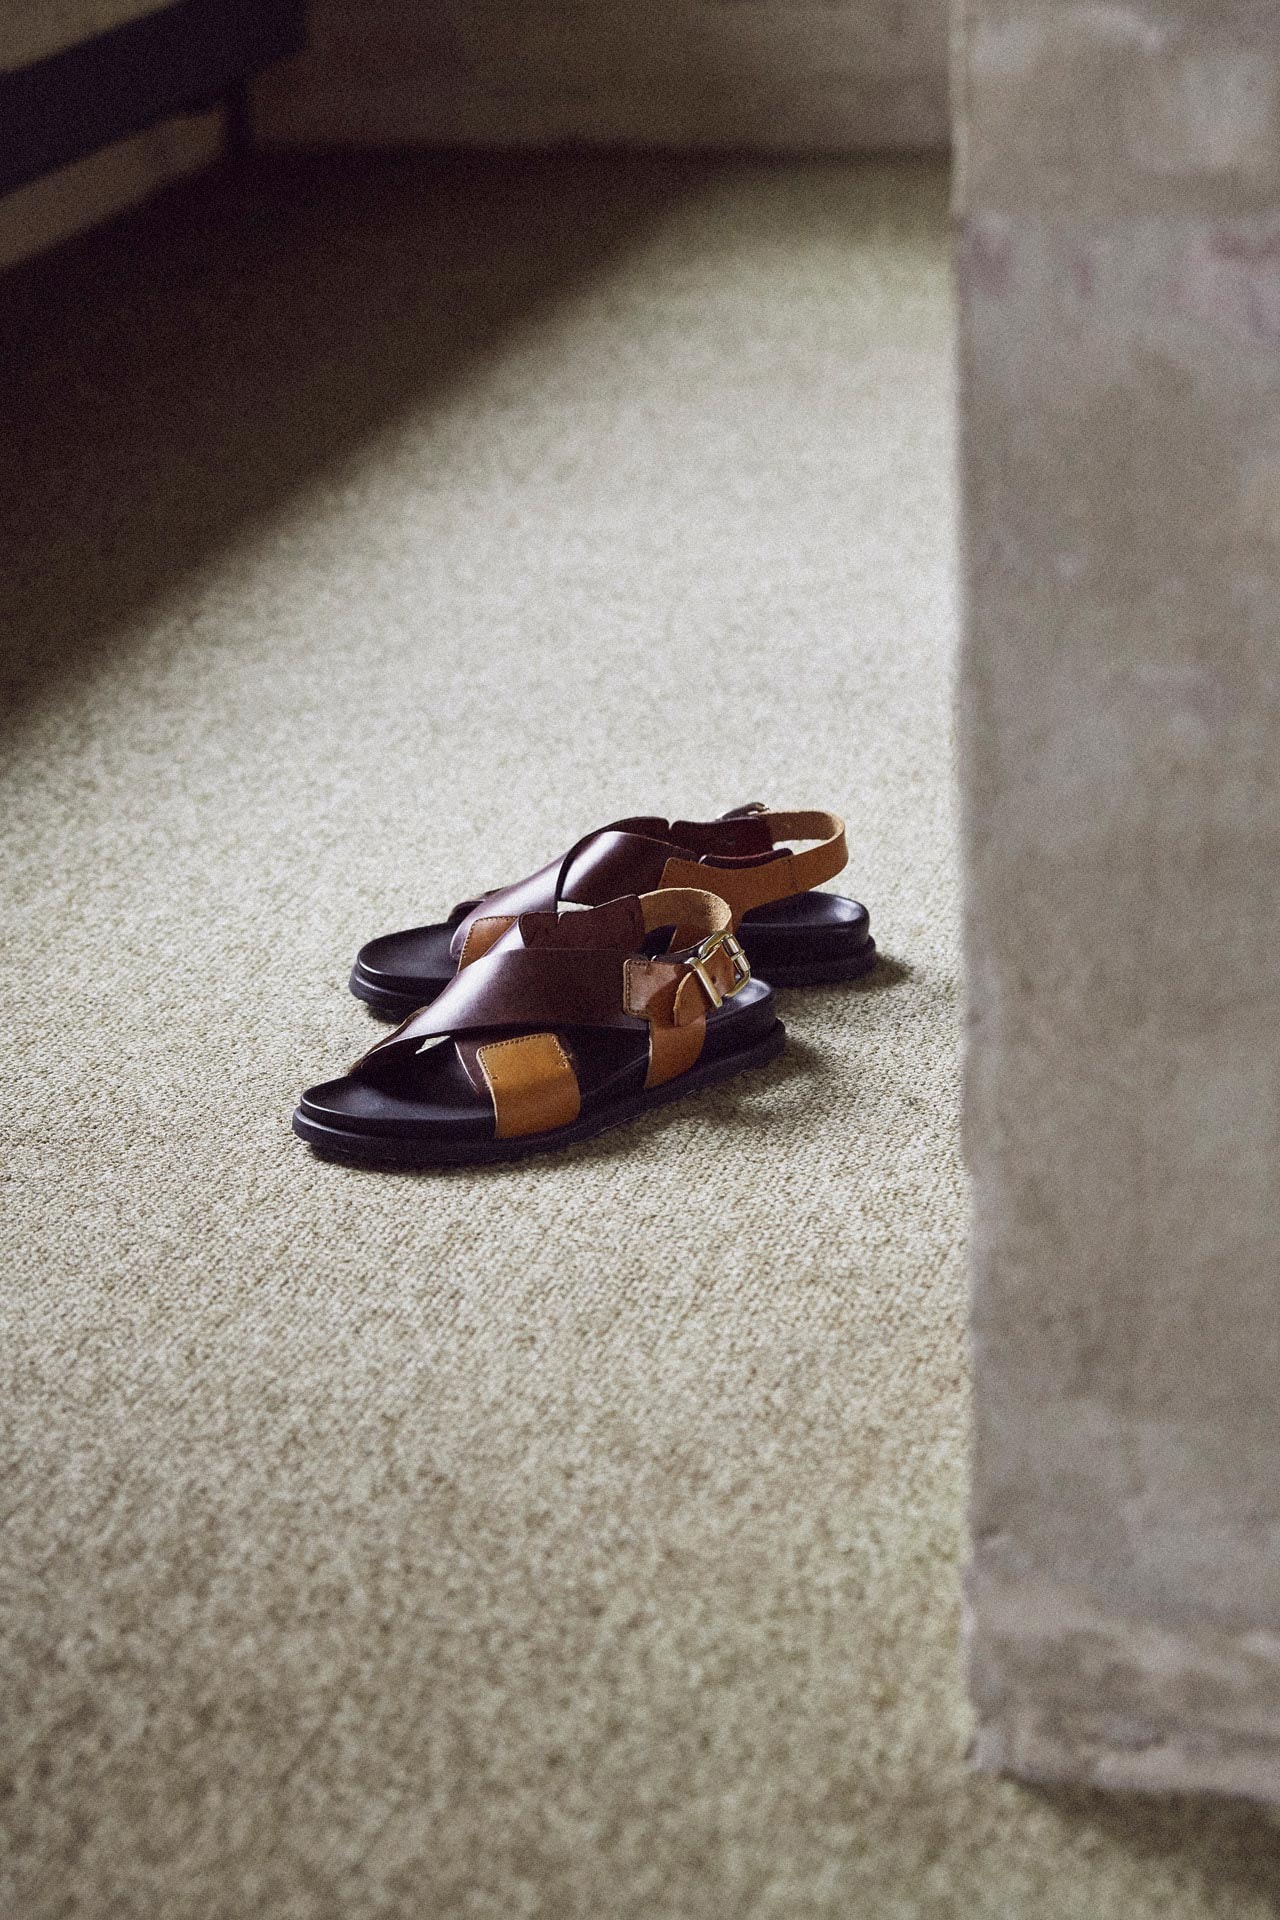 Norse Store Spring Summer 2019 Editorial Sandals Brown